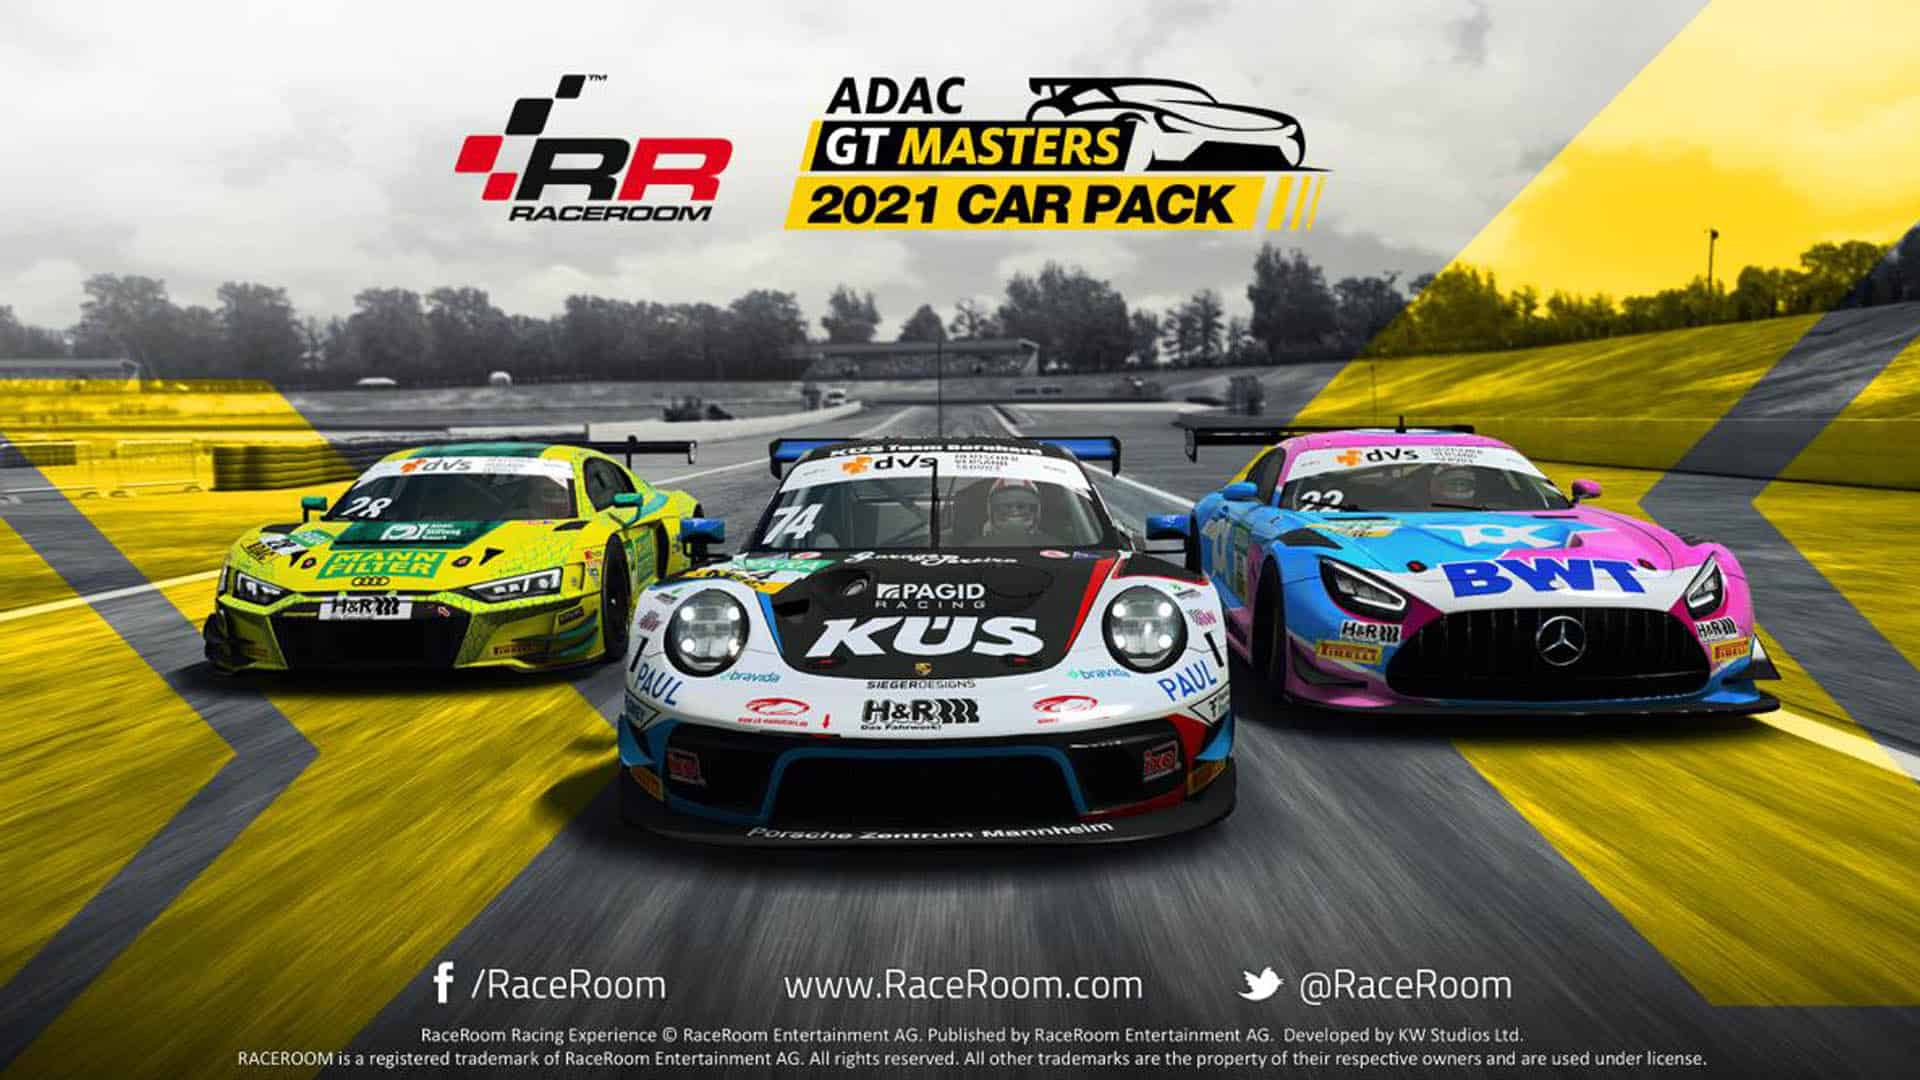 2021 ADAC GT Masters car pack now available for RaceRoom Traxion